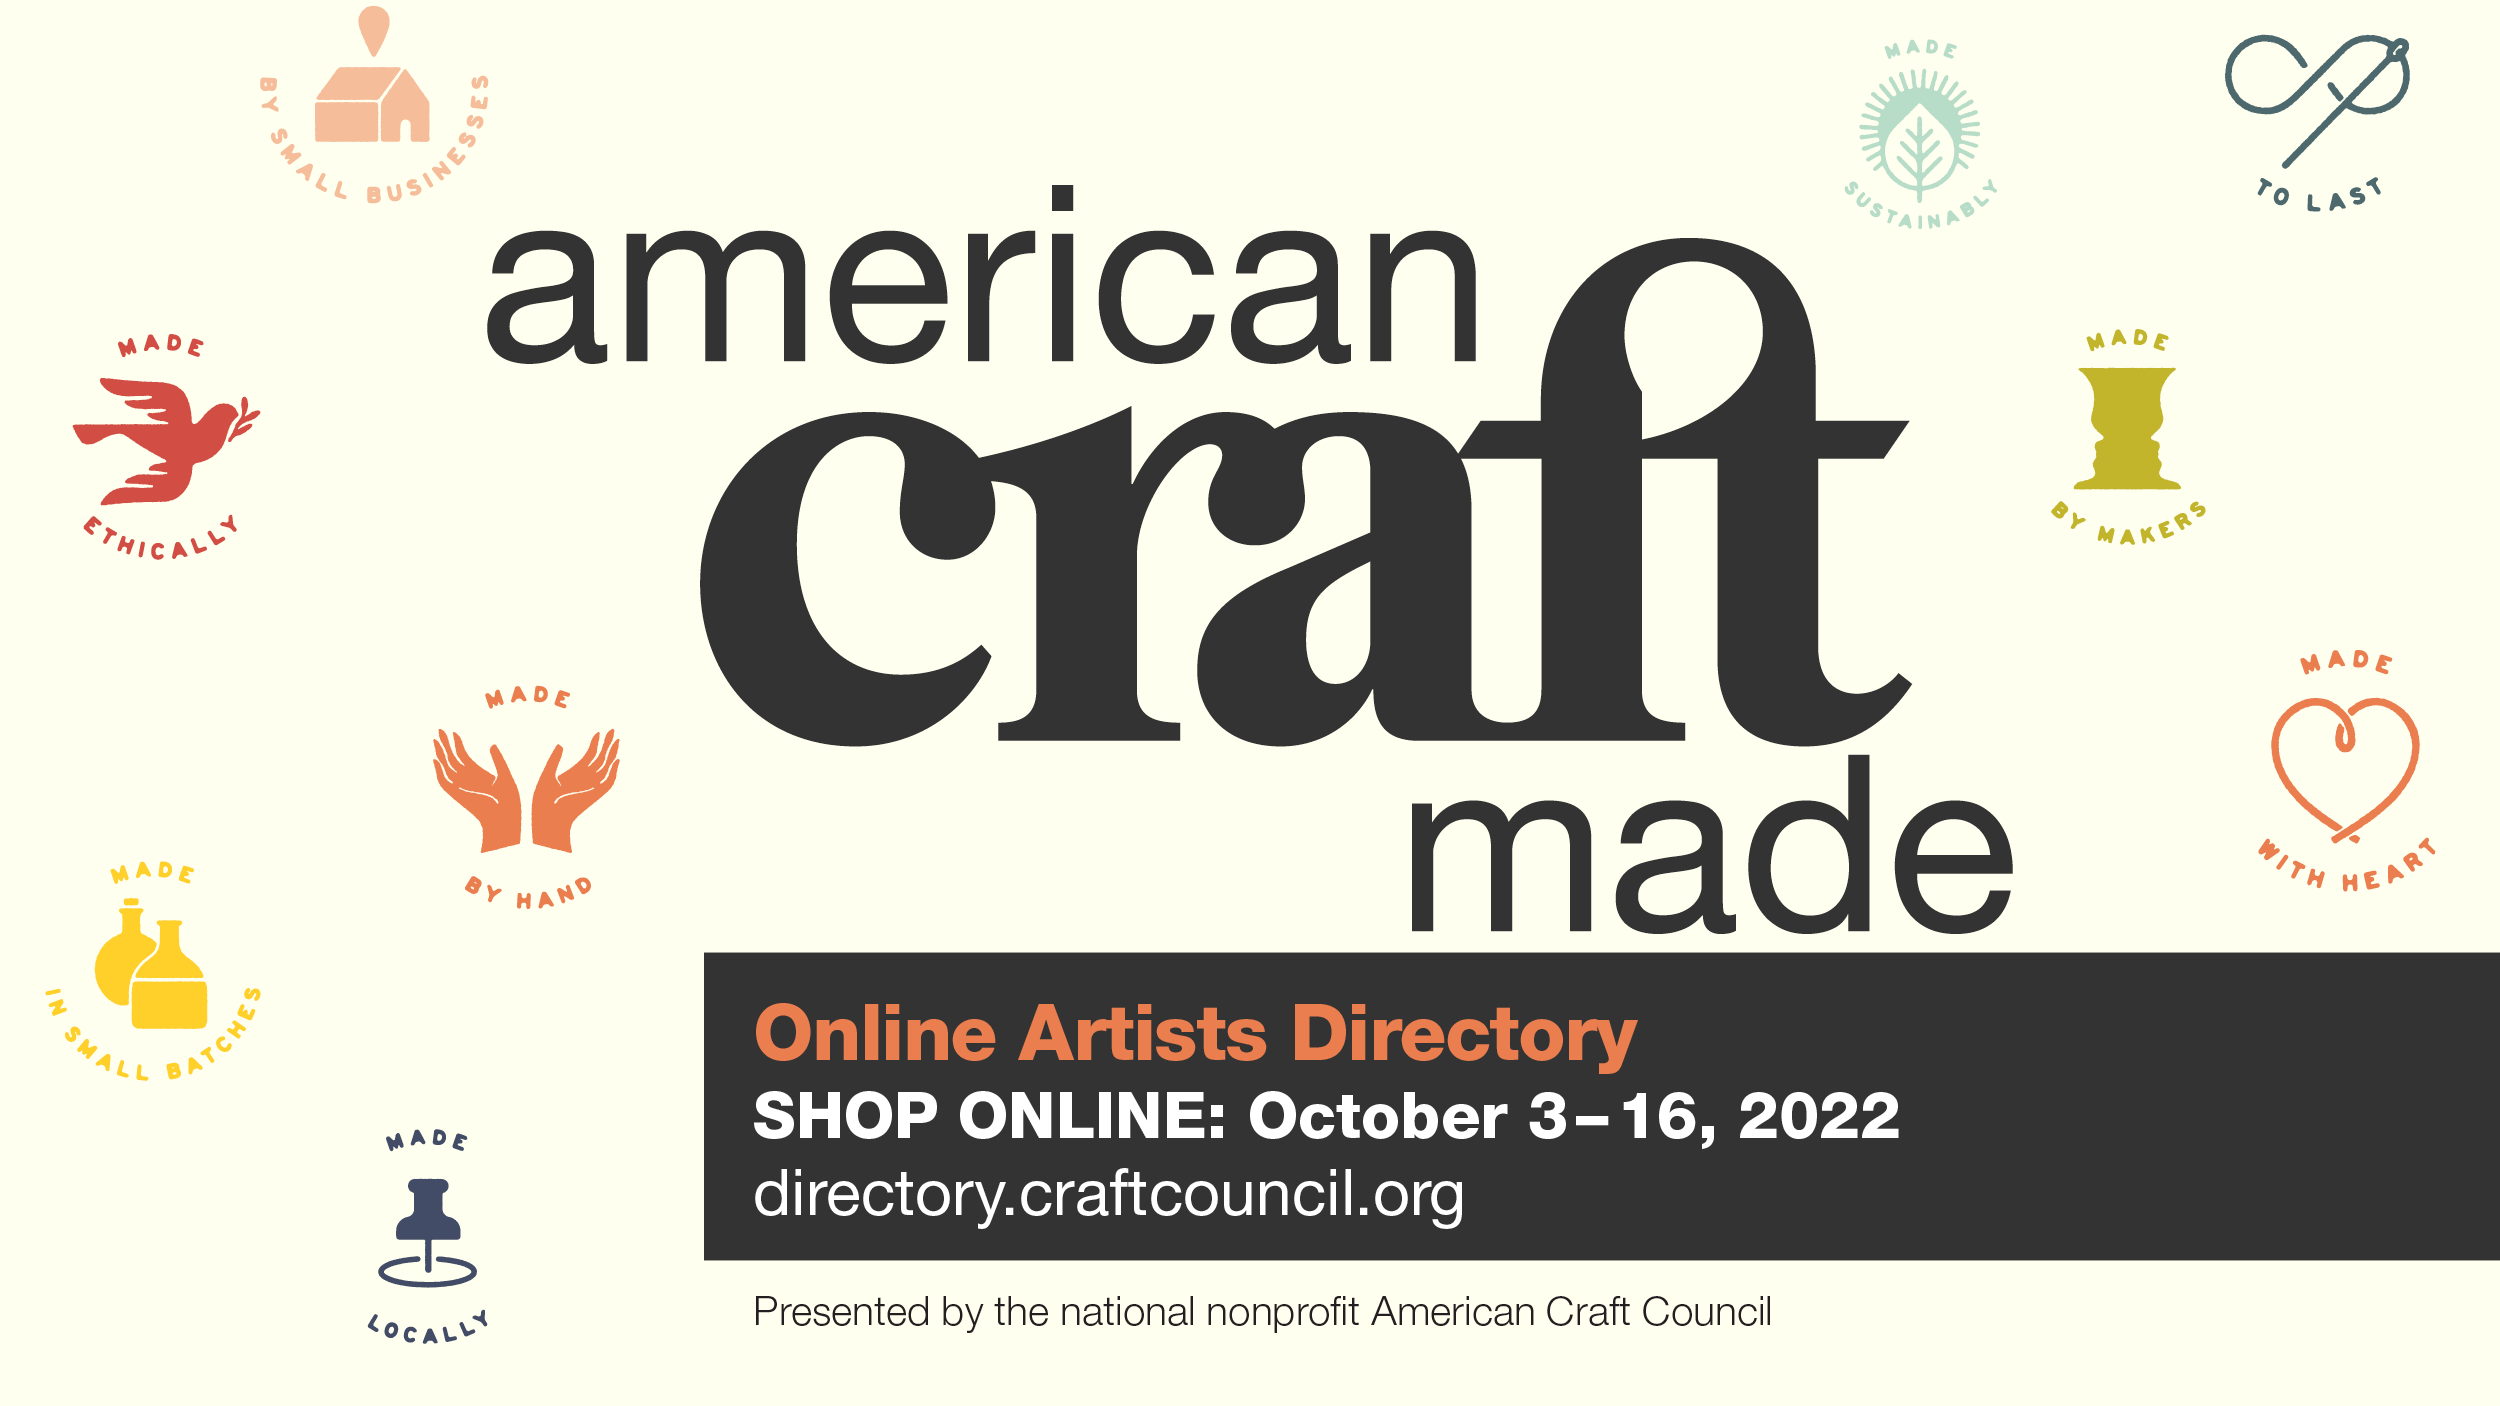 american craft made online artists directory shop online october third through the sixteenth 2022 at directory dot craft council dot org presented by the national nonprofit American Craft Council